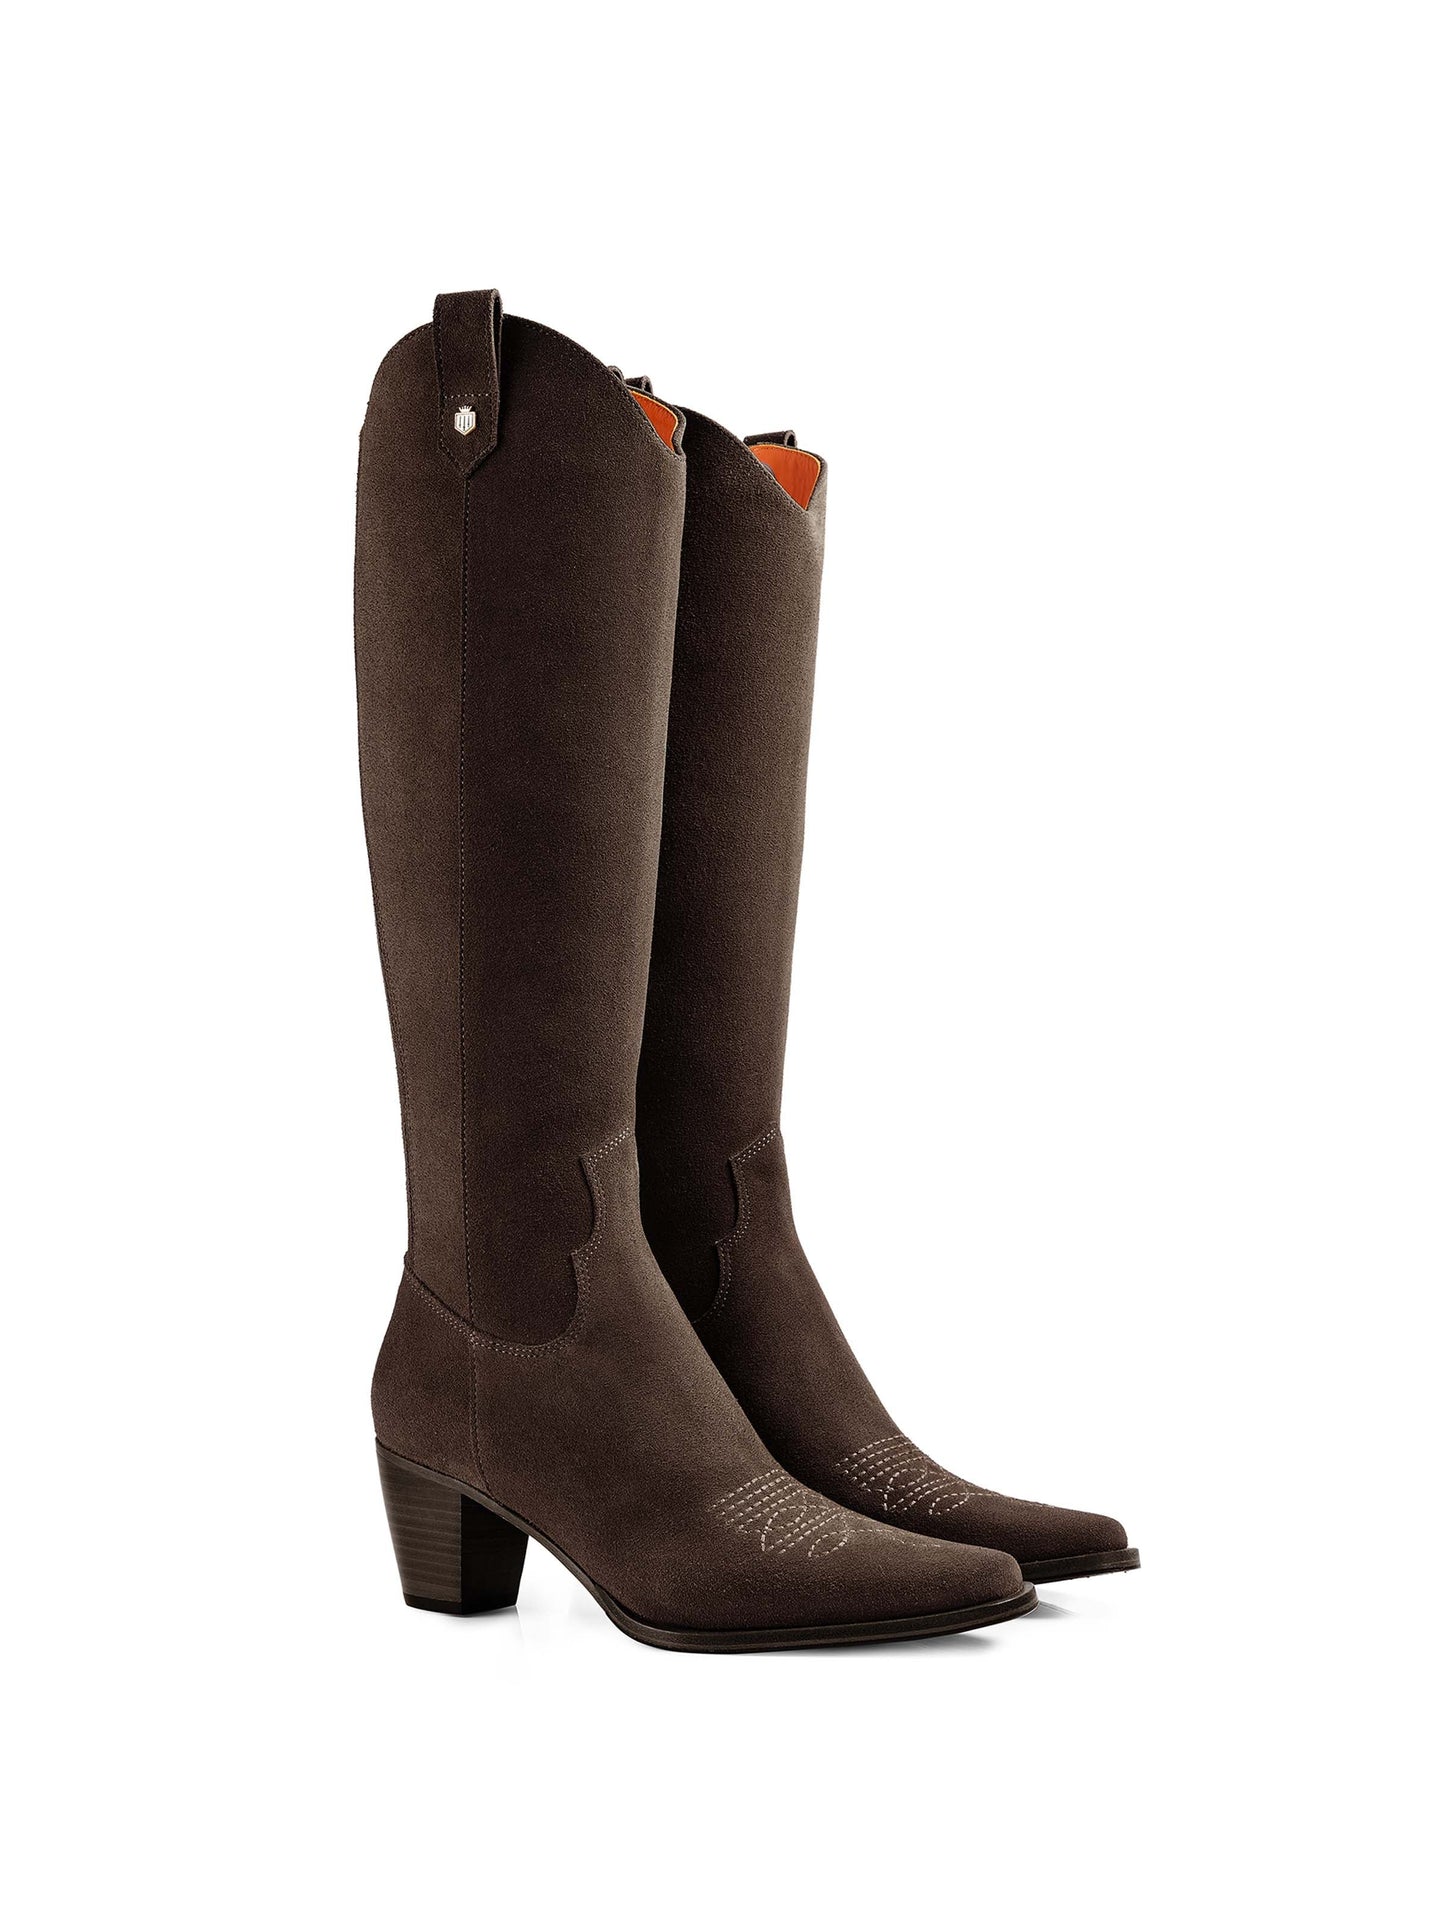 The Knee High Rockingham Boot - Chocolate Suede